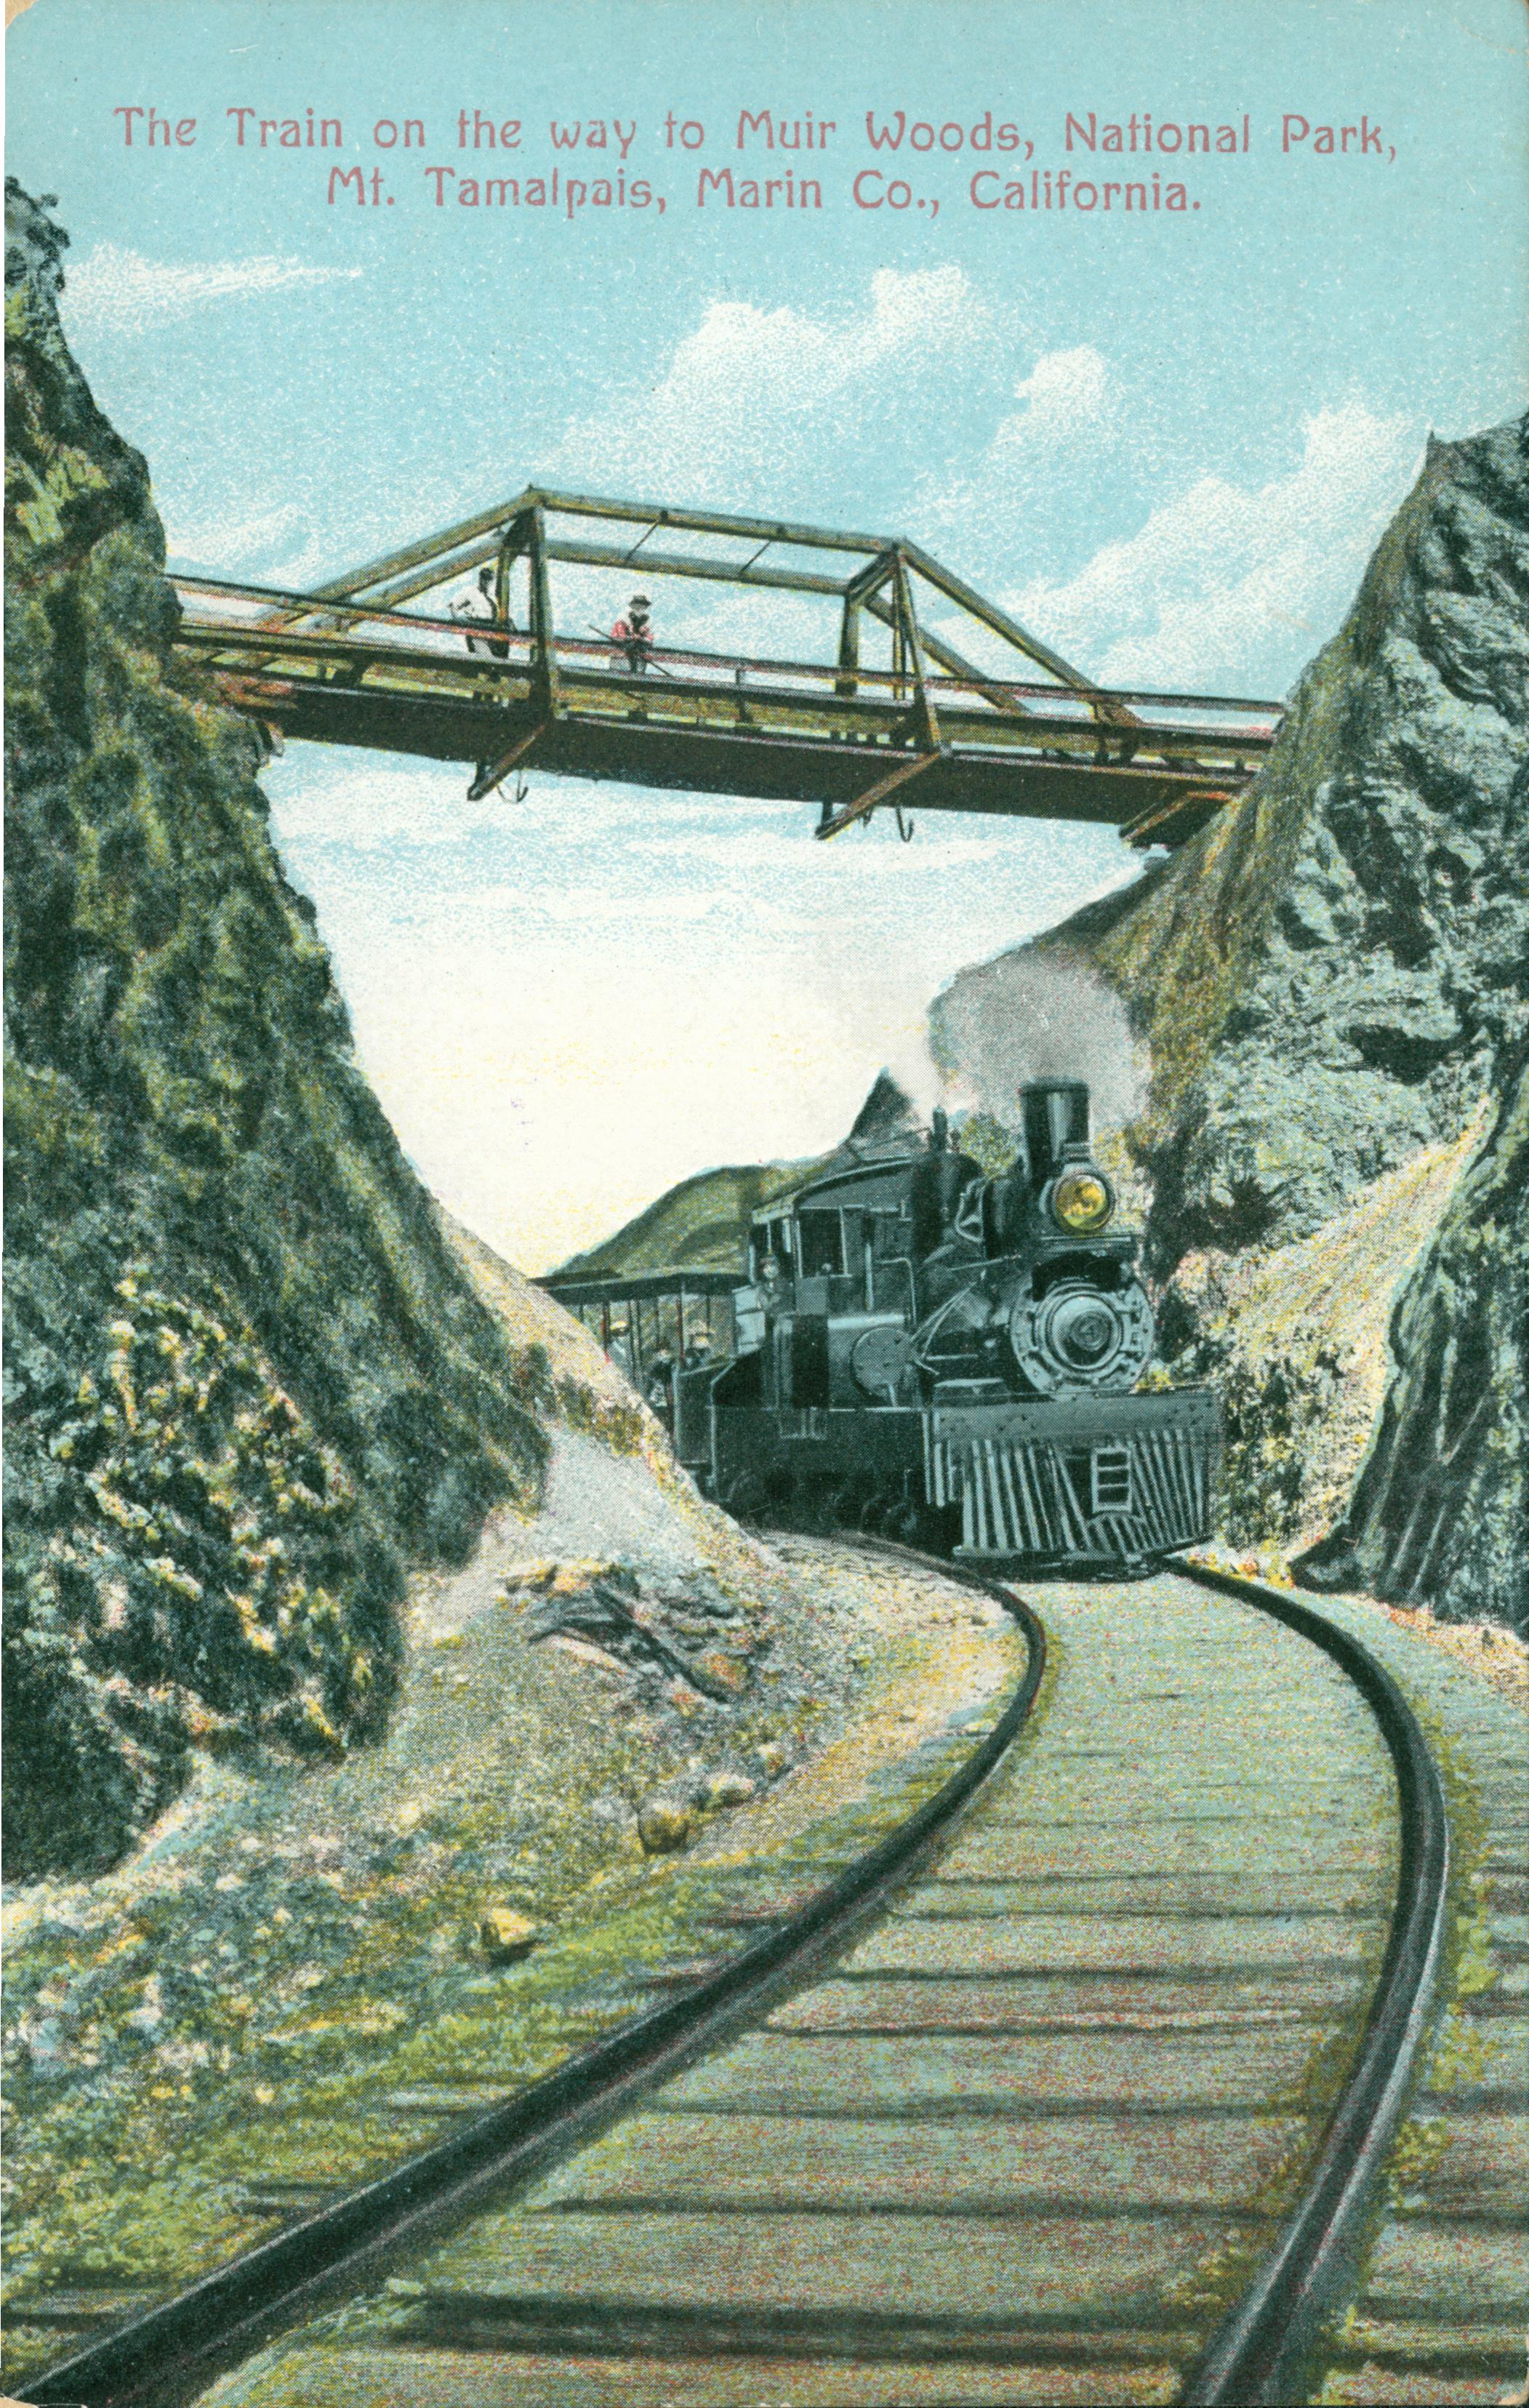 Steam engine traveling on track through cut with bridge overhead.